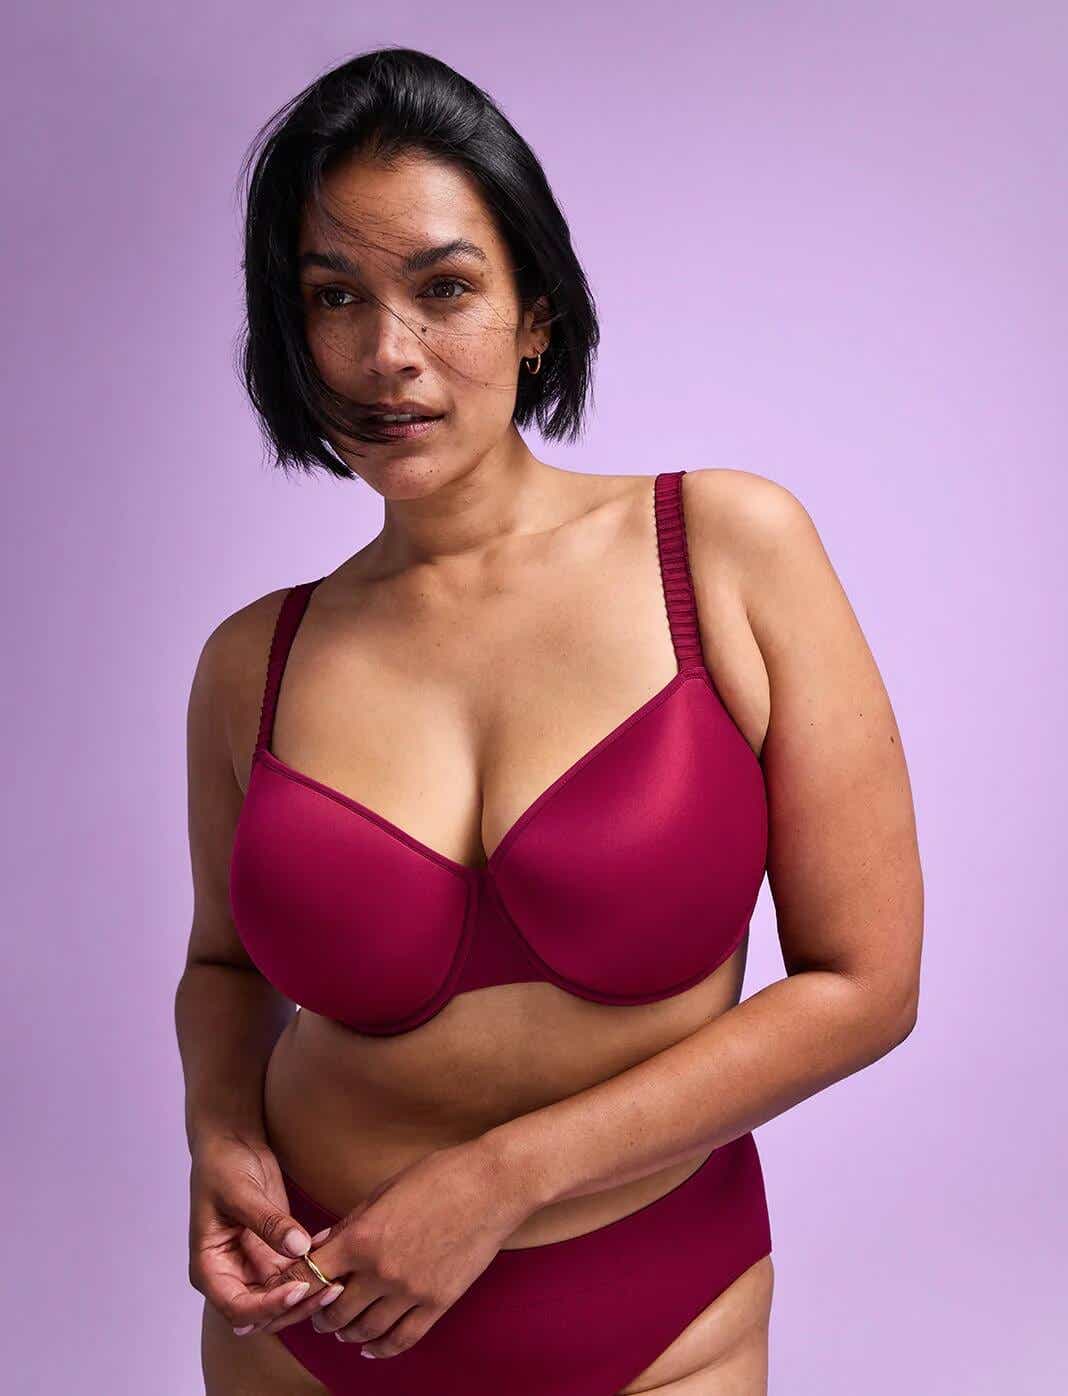 Woman shares pics of her big boobs in different size bras and is